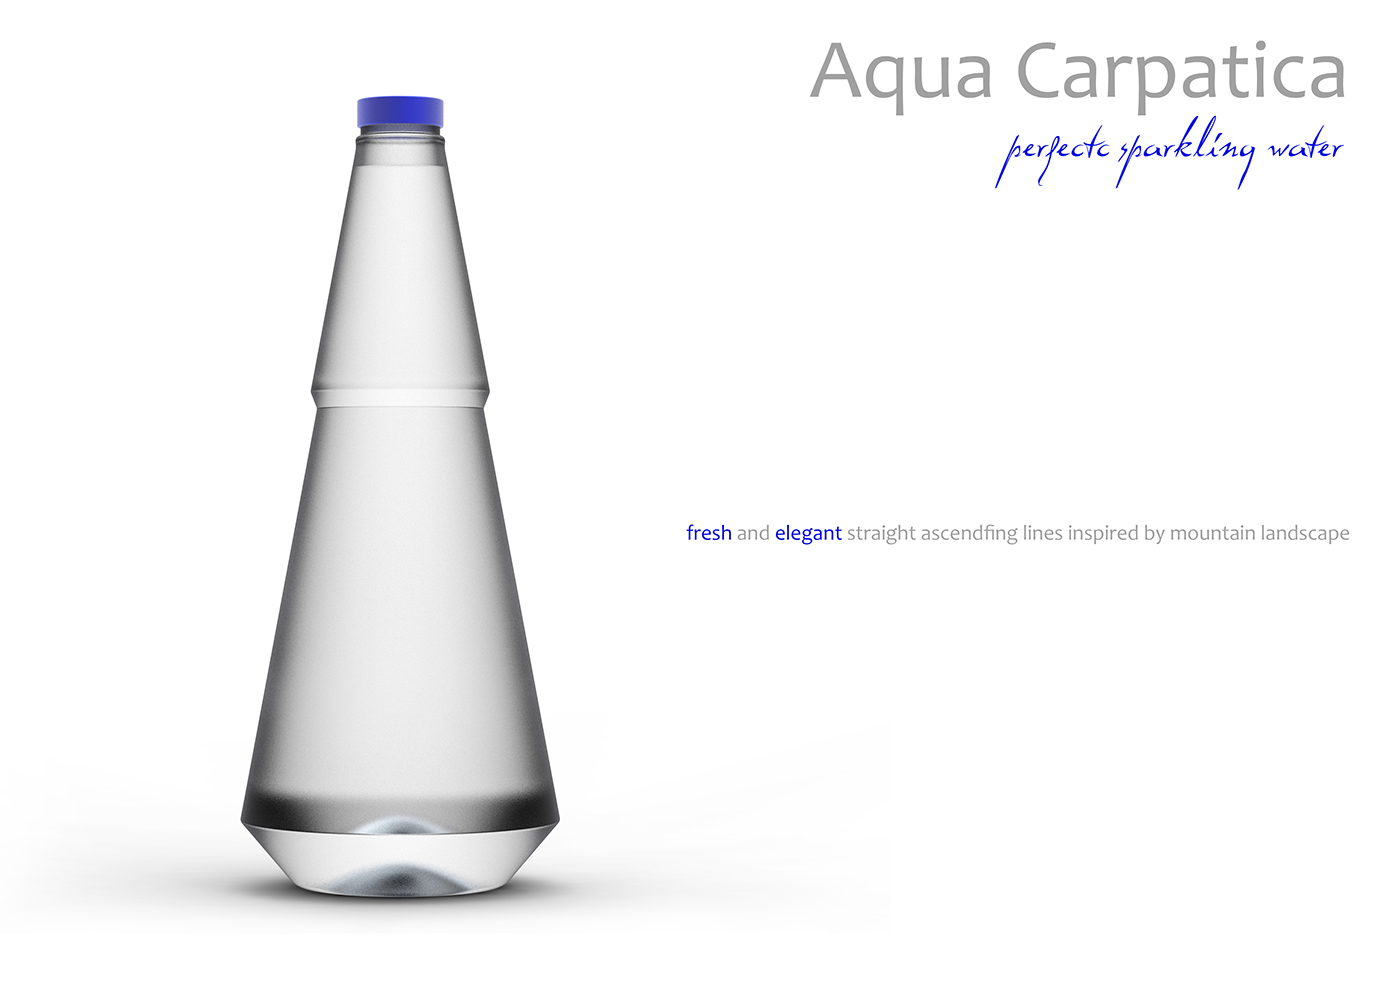 water bottle Packaging sparkling pure